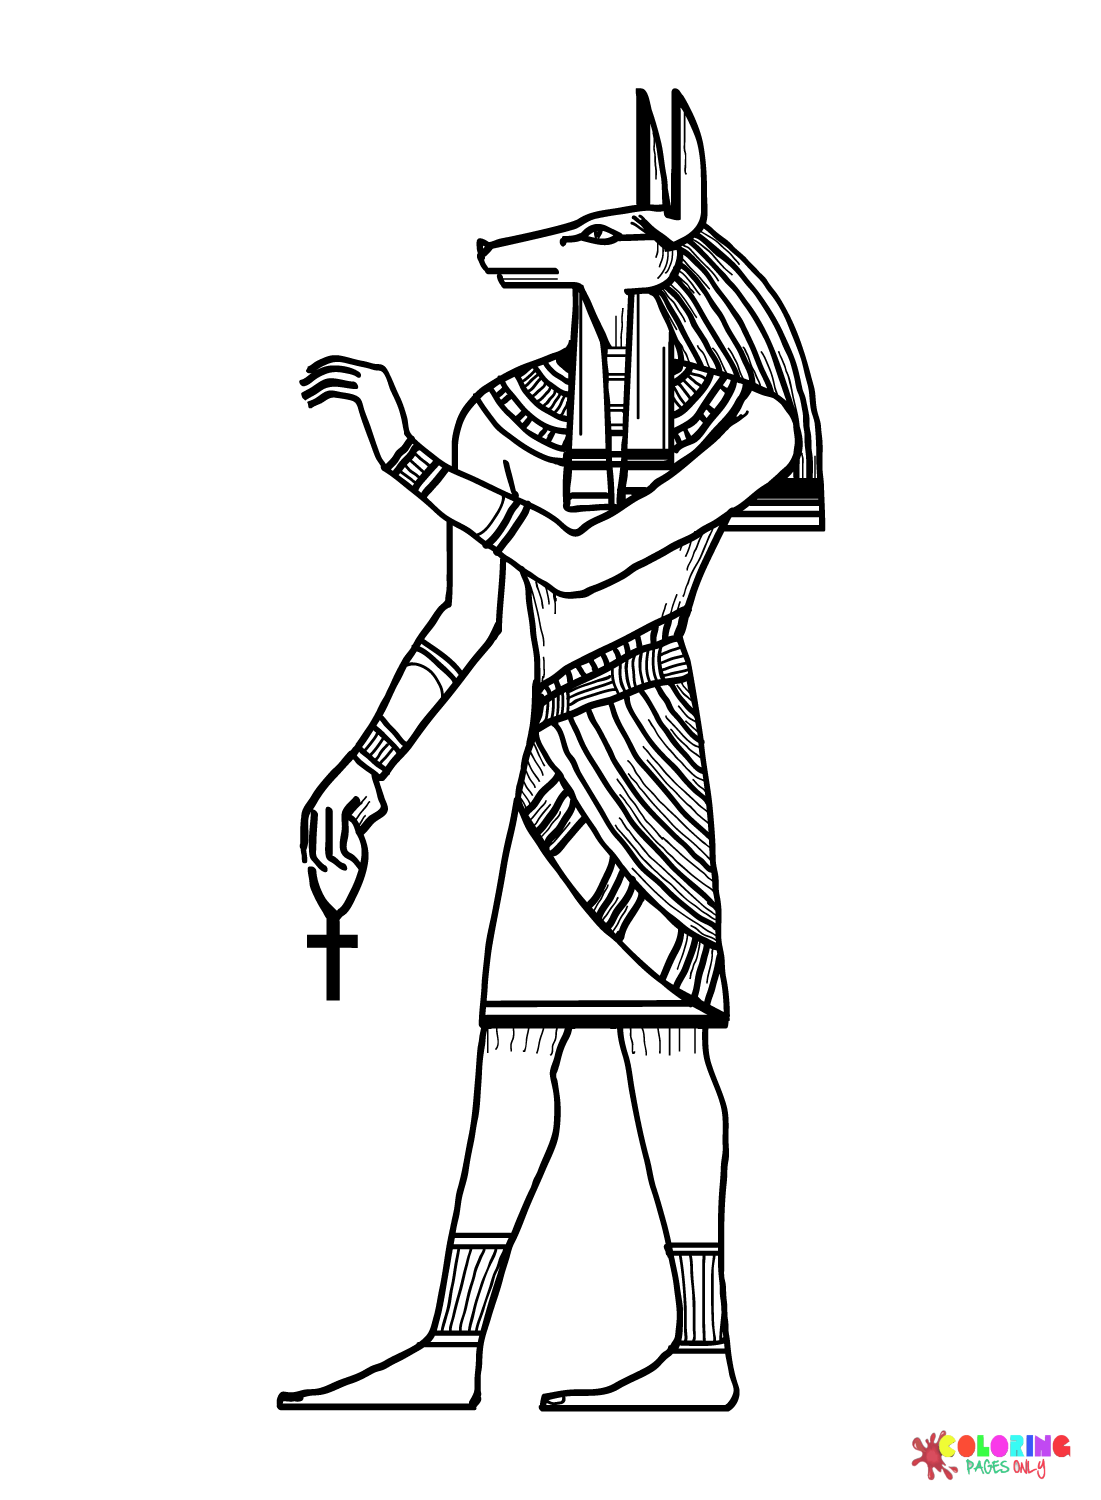 Guards Ancient Egypt Coloring Page